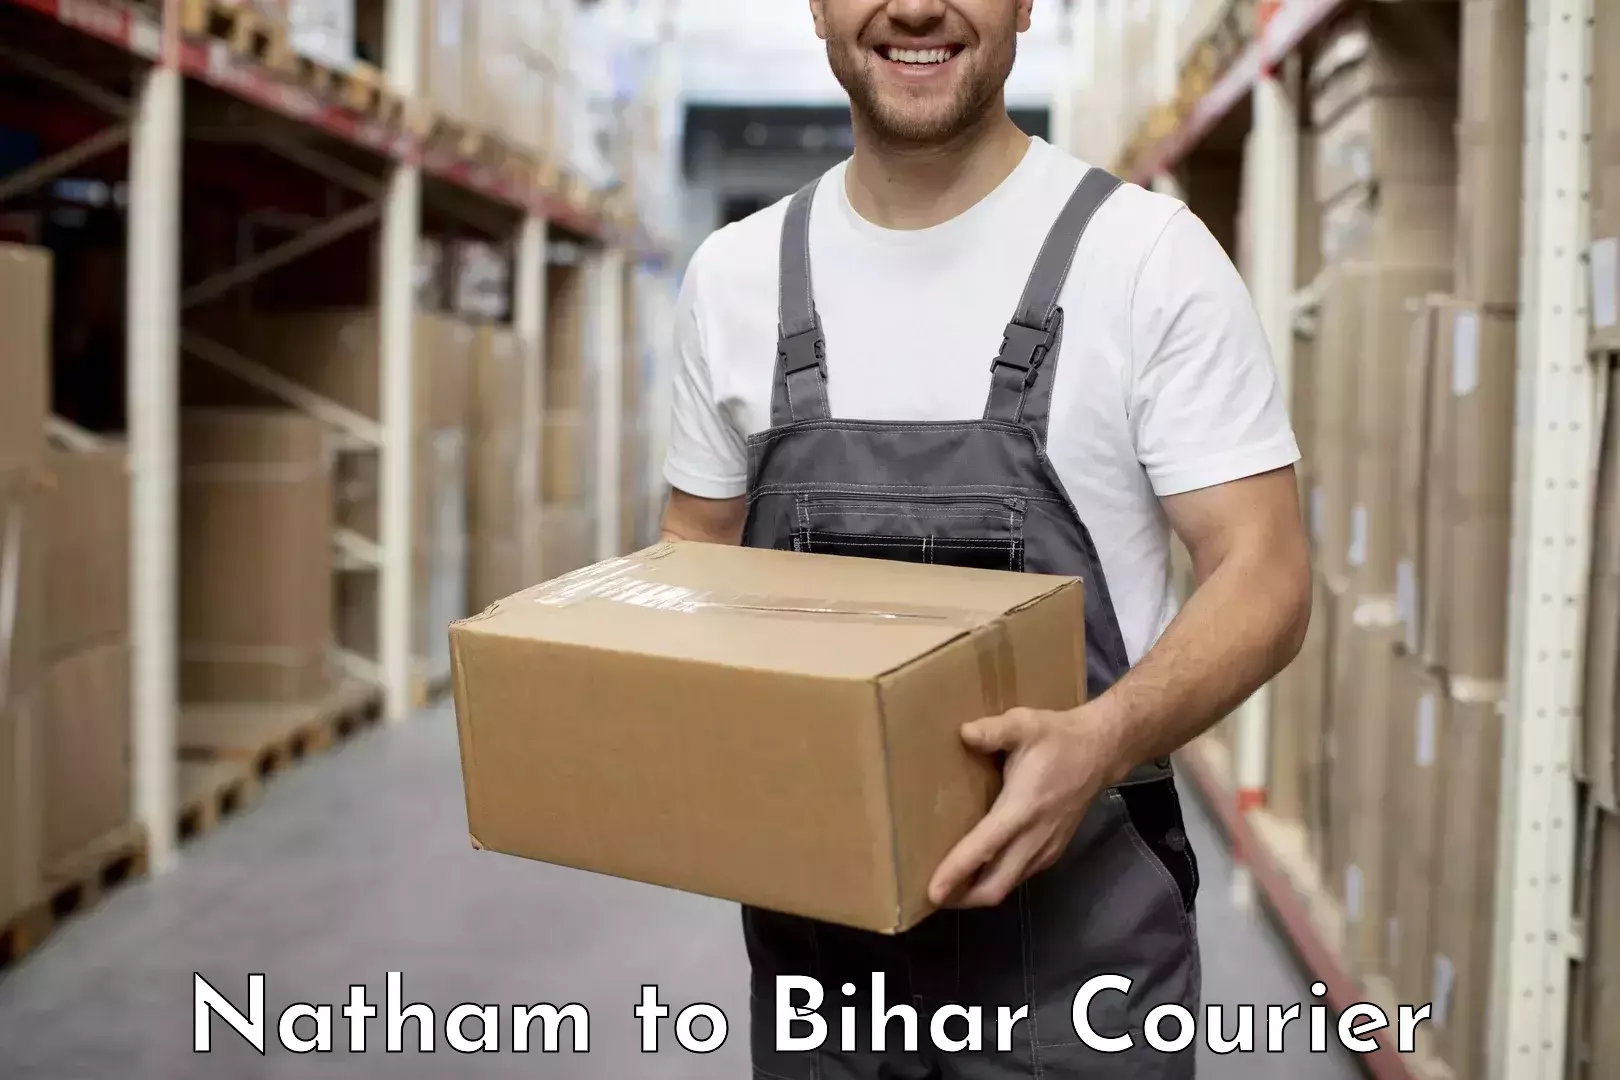 State-of-the-art courier technology Natham to Jiwdhara